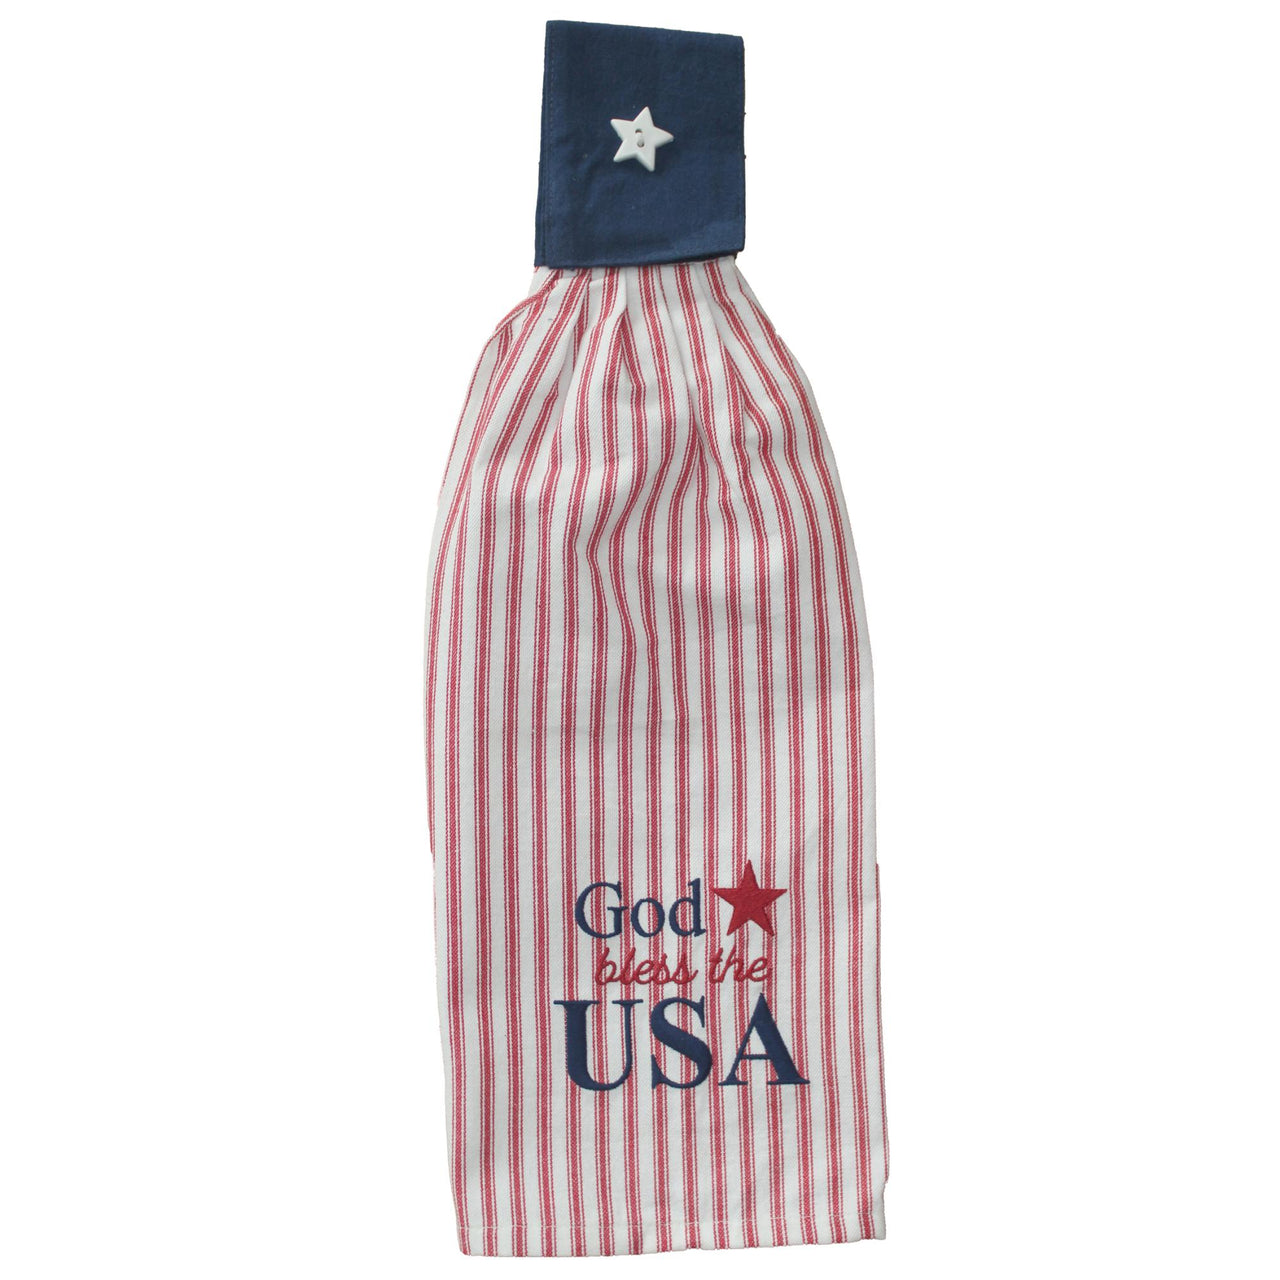 God Bless The USA Tab Towel - Interiors by Elizabeth